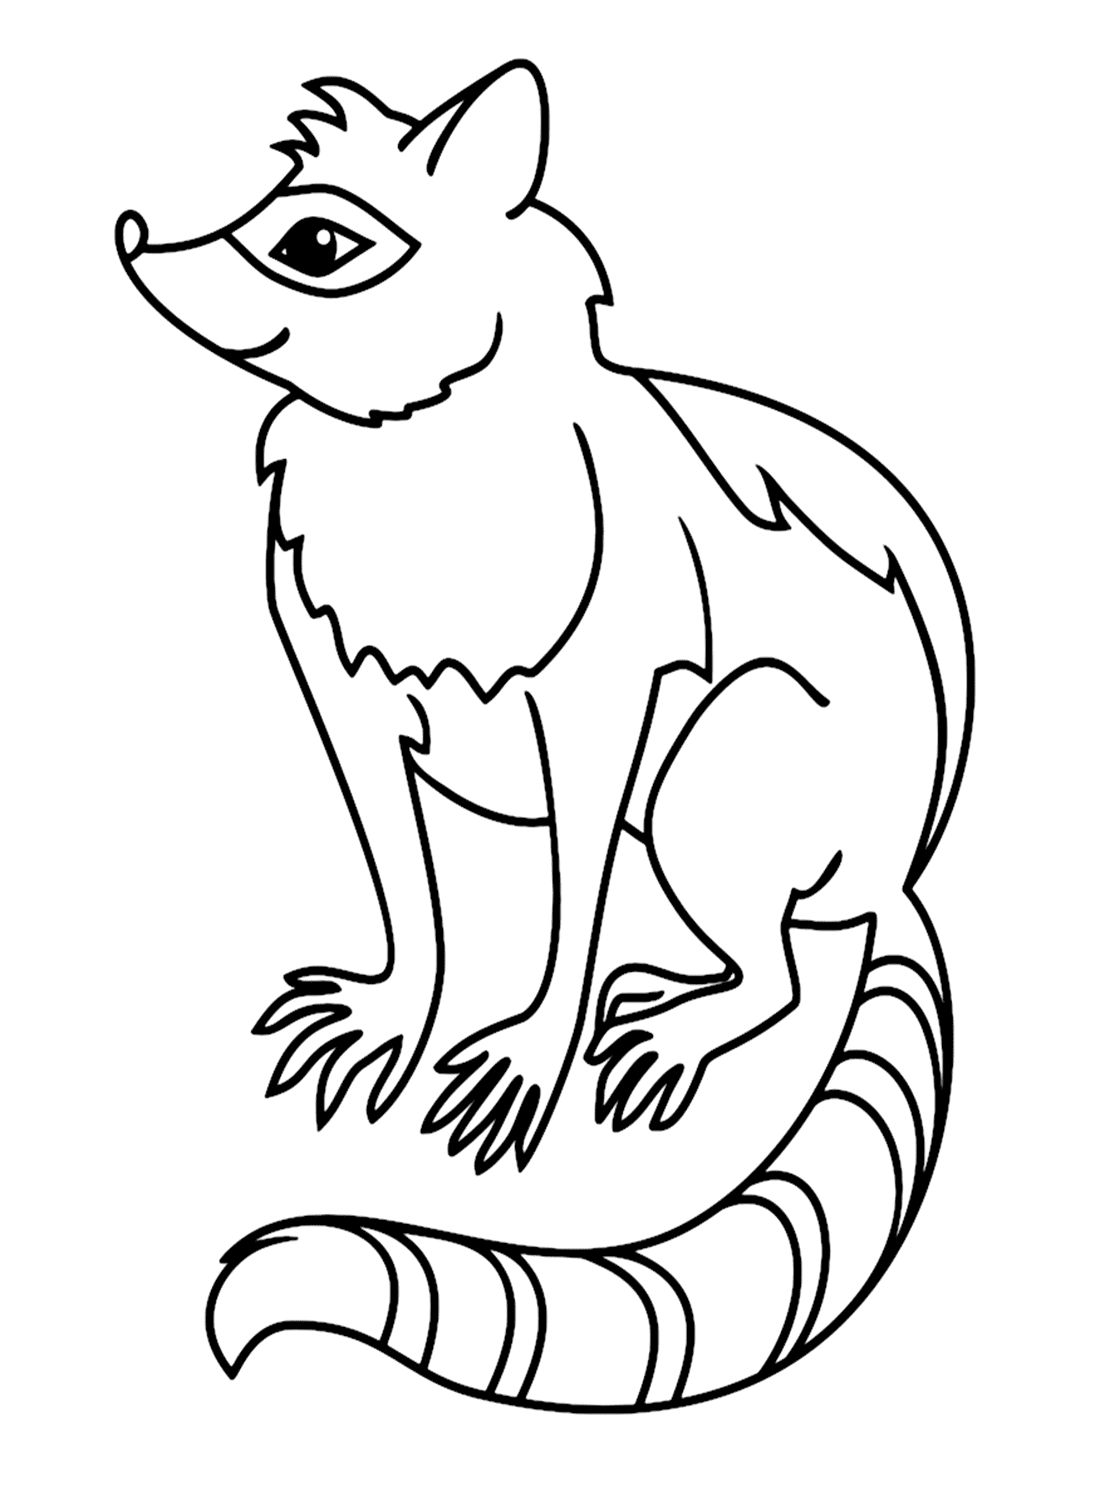 Raccoon Outline Coloring Page - Free Printable Coloring Pages